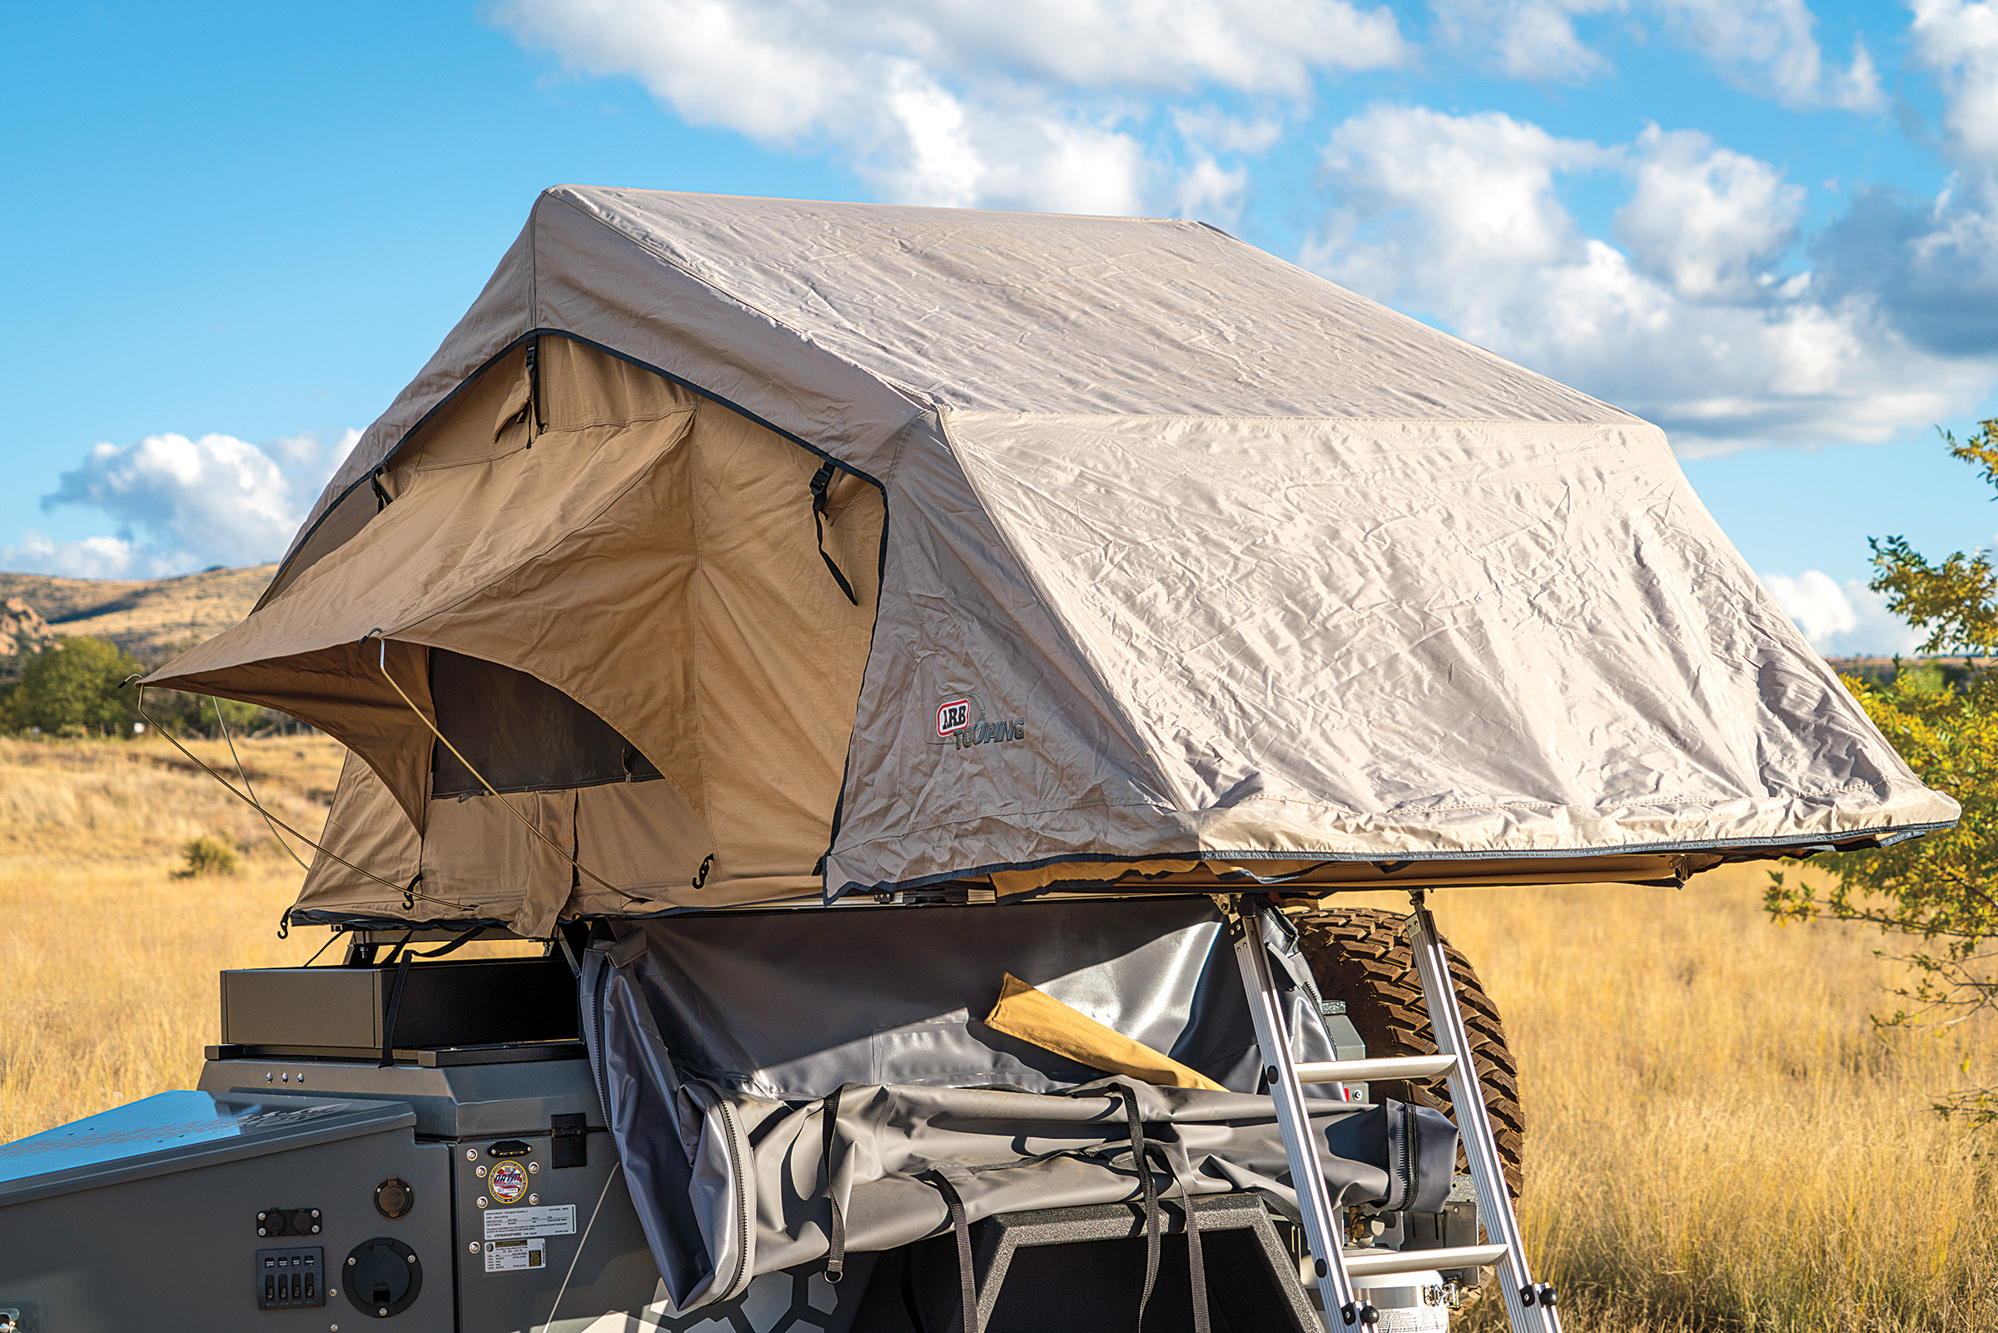 Roof Top Tent Comparison Test :: Who Takes the Prize? - Expedition Portal